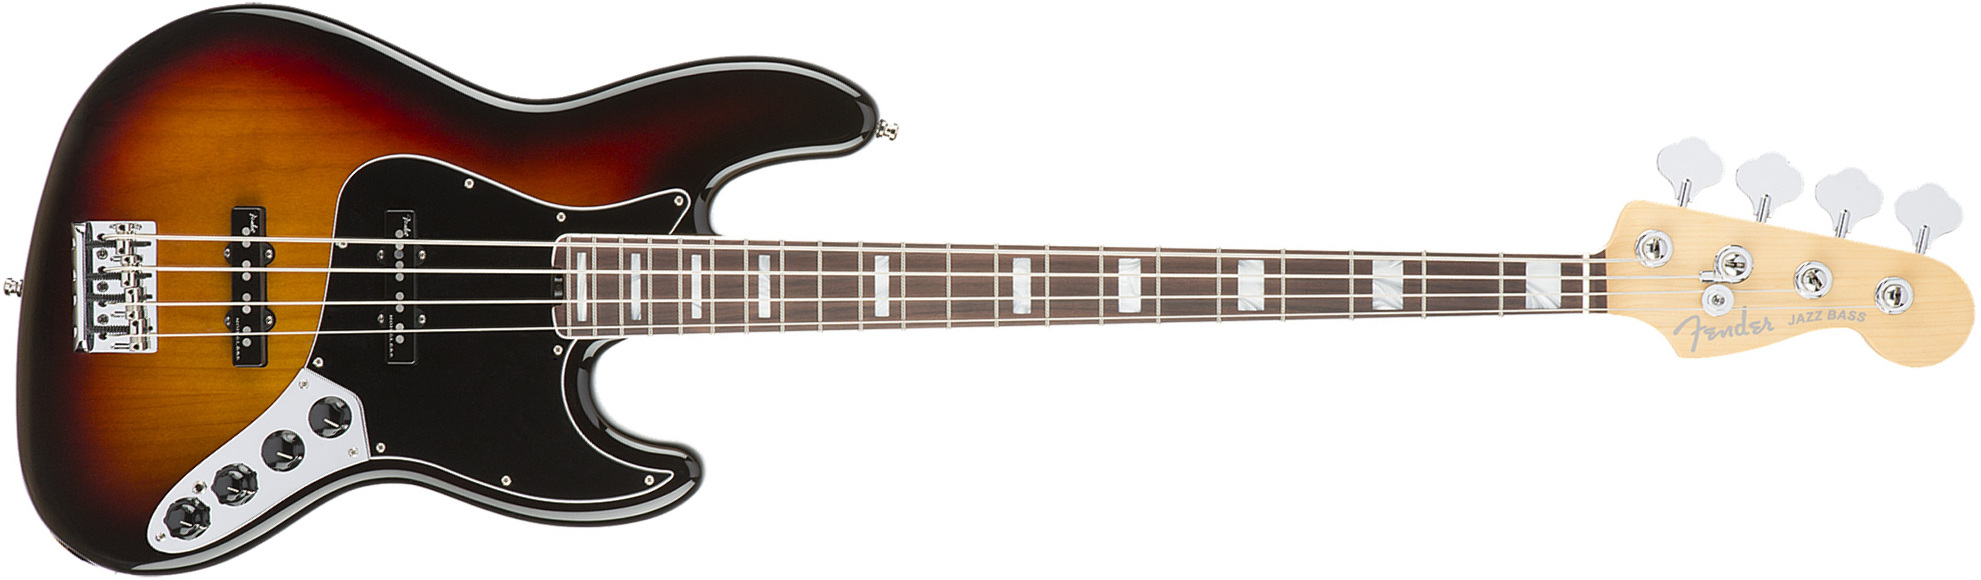 Fender Jazz Bass American Elite 2016 (usa, Rw) - 3-color Sunburst - Solid body electric bass - Main picture